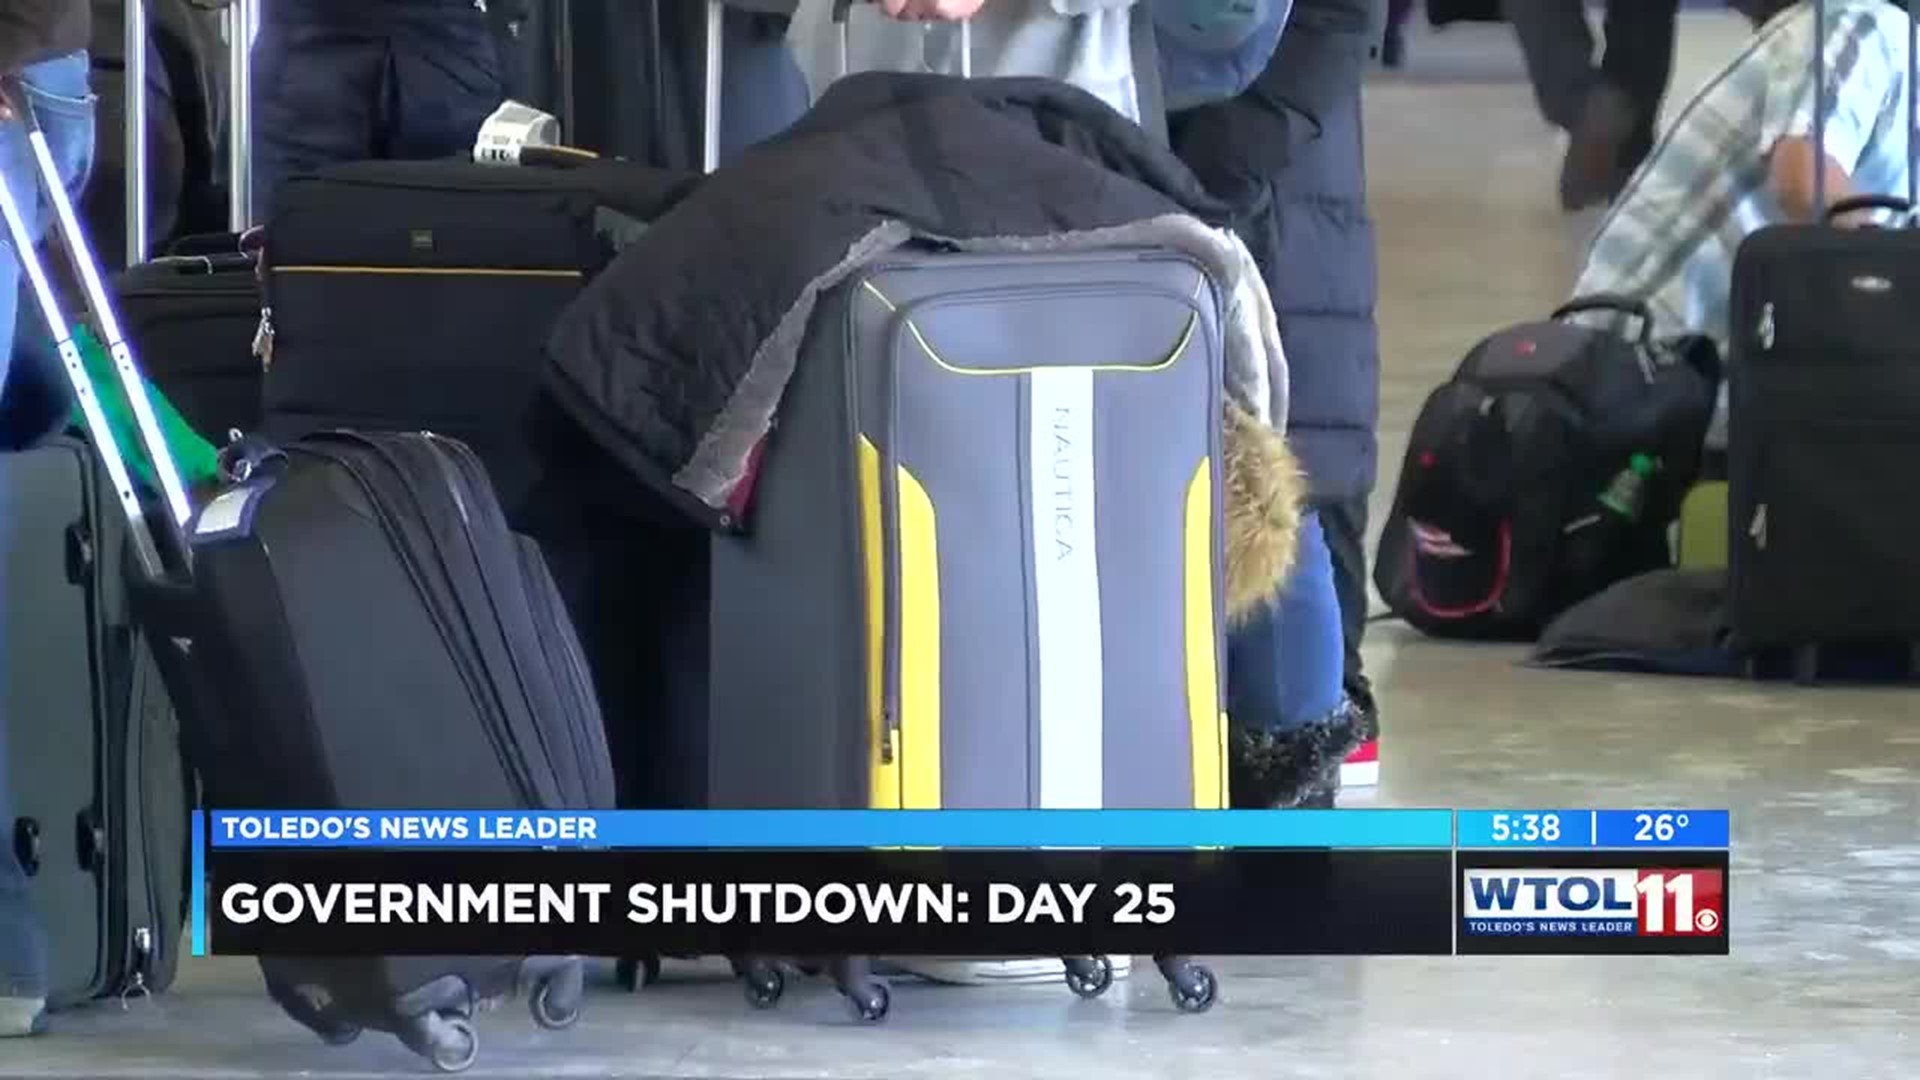 Travel experts urge air travelers to give extra time before flight